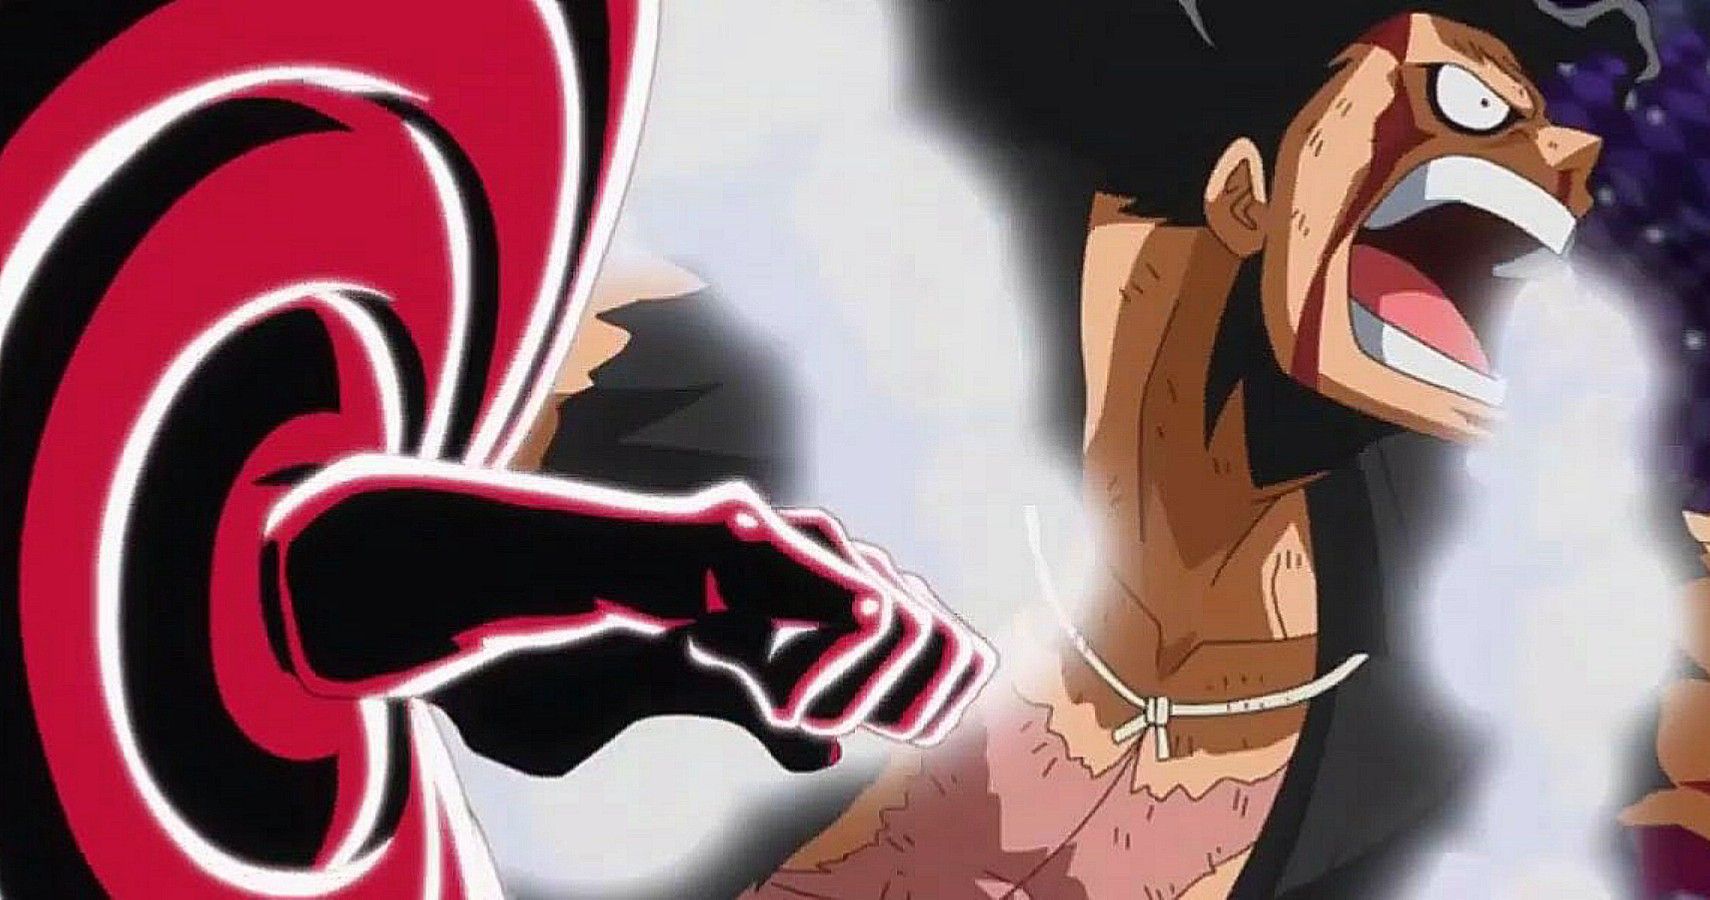 One Piece': Ranking Luffy's Gear's according to strength